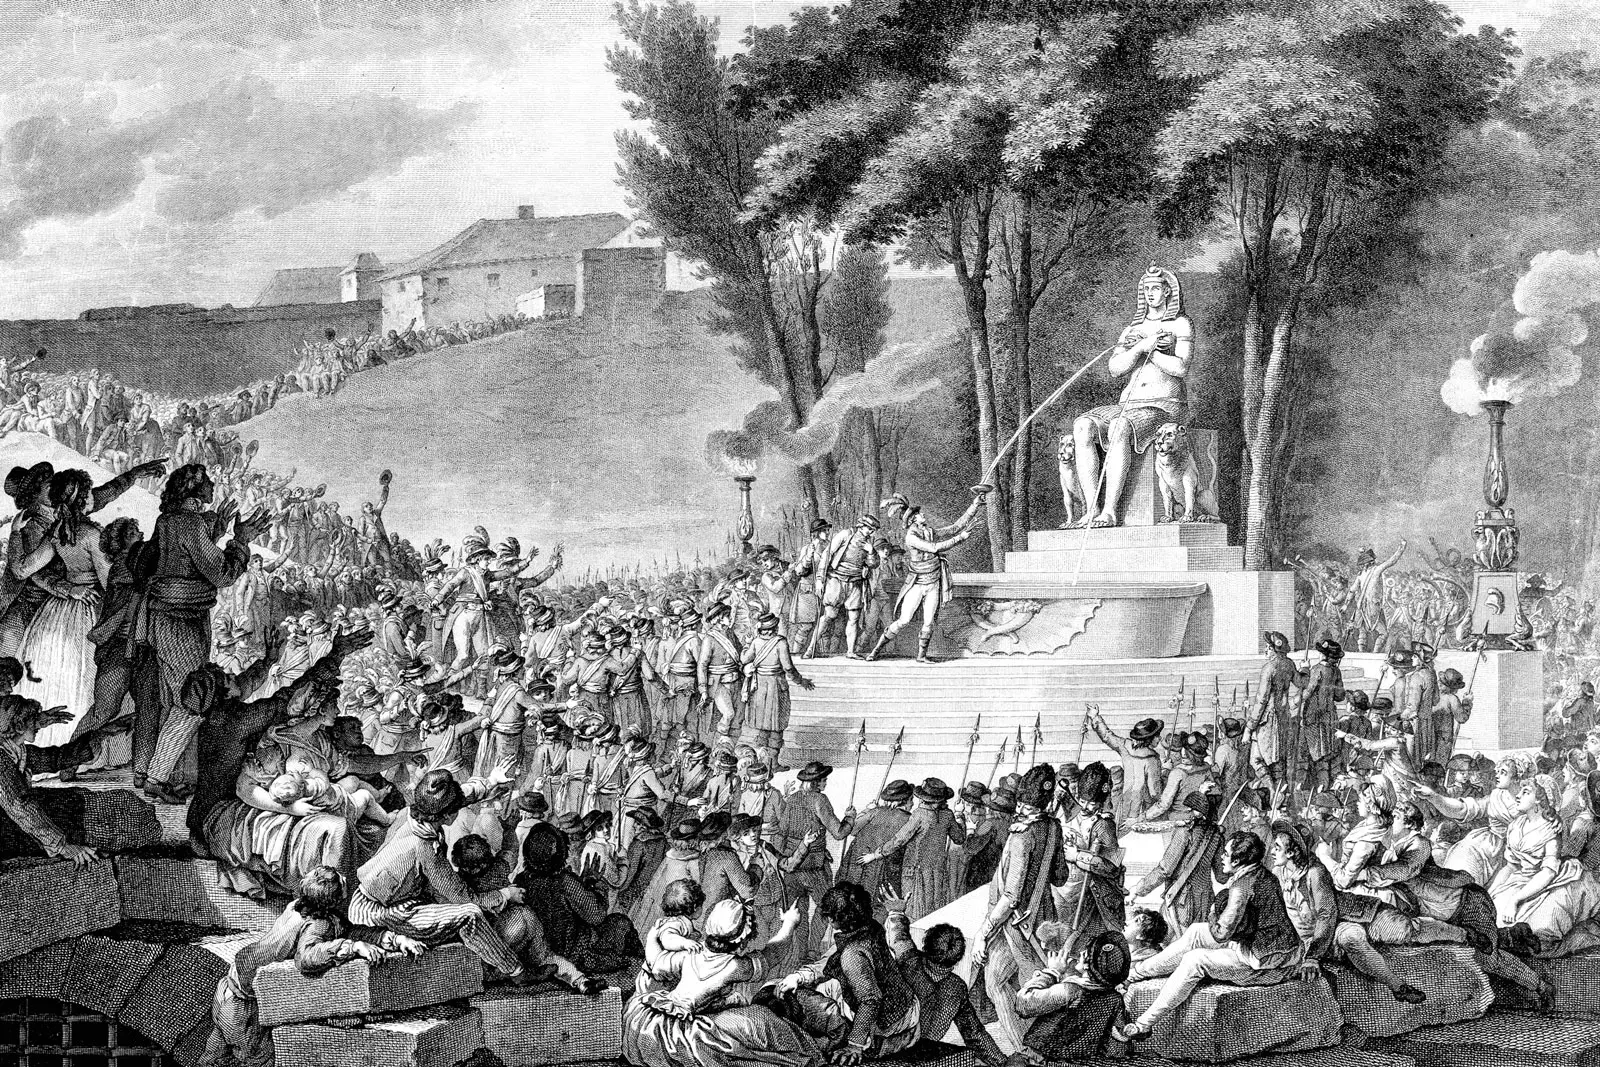 In 1793 the ancient Egyptian goddess Isis returned to Paris, with the French Revolution, as a fontain Place de la Bastille